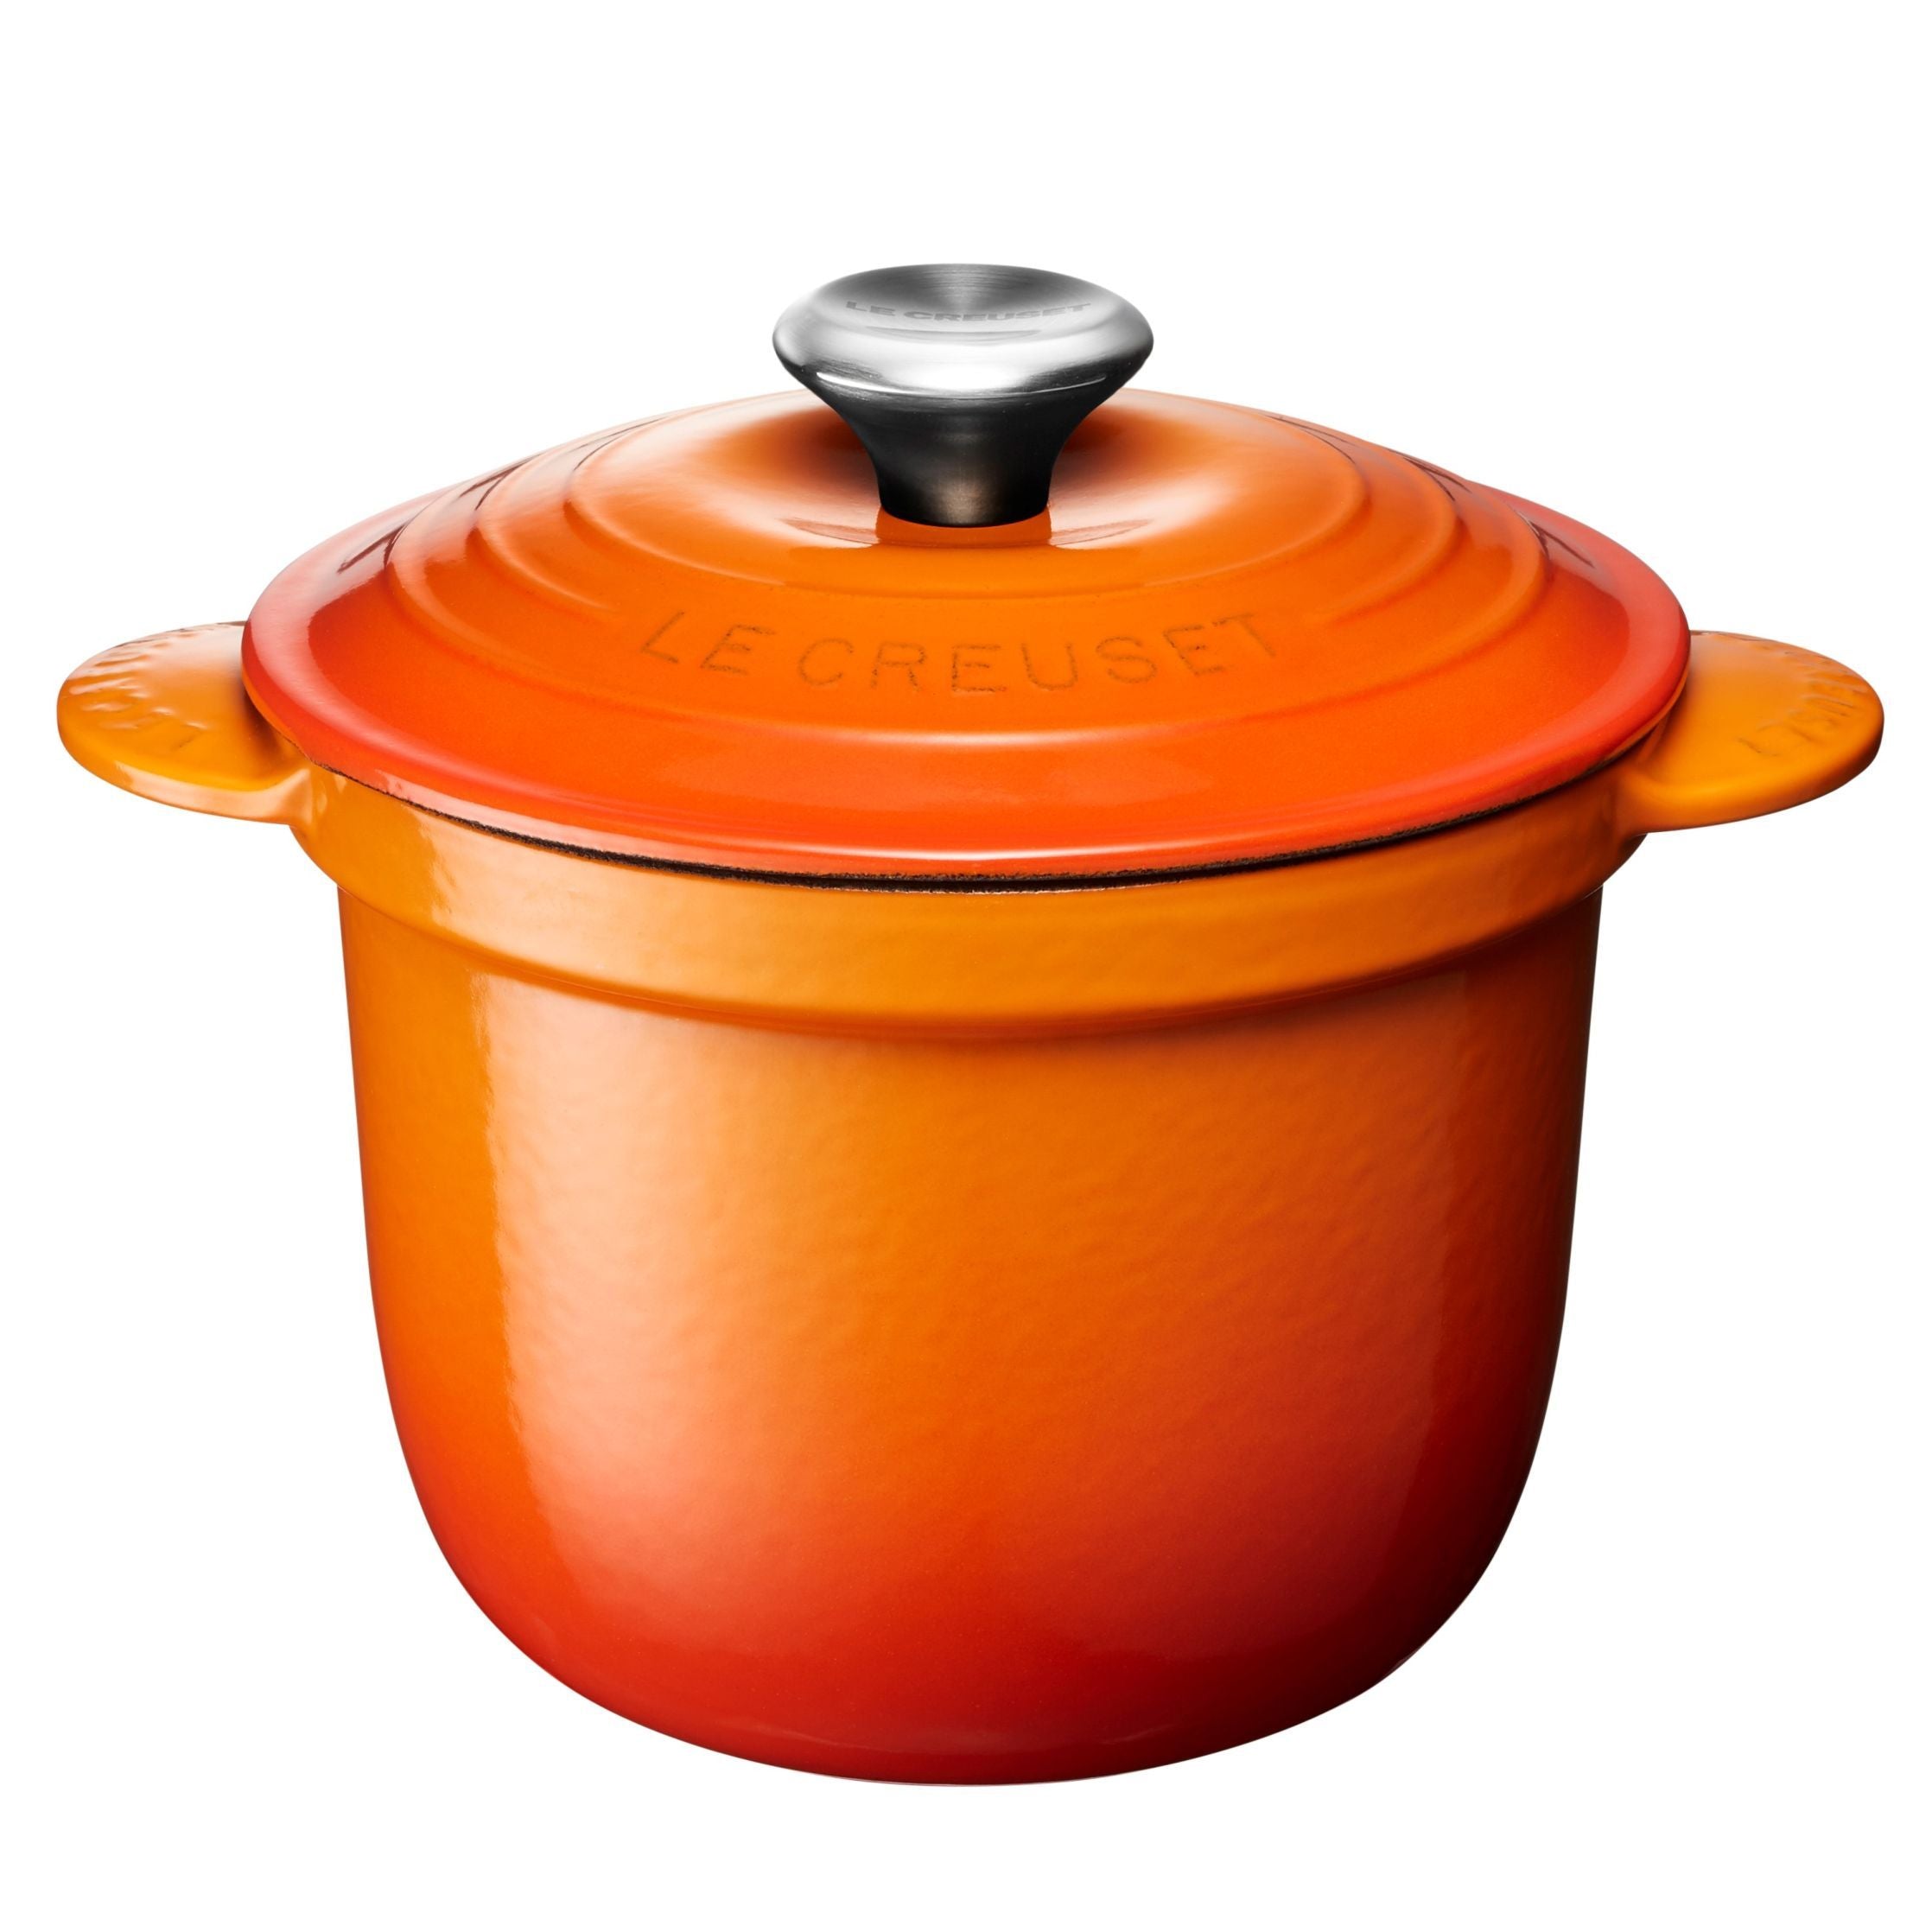 Le Creuset Cocotte Every Mit Poteriedeckel 18 Cm, Backofen Rot